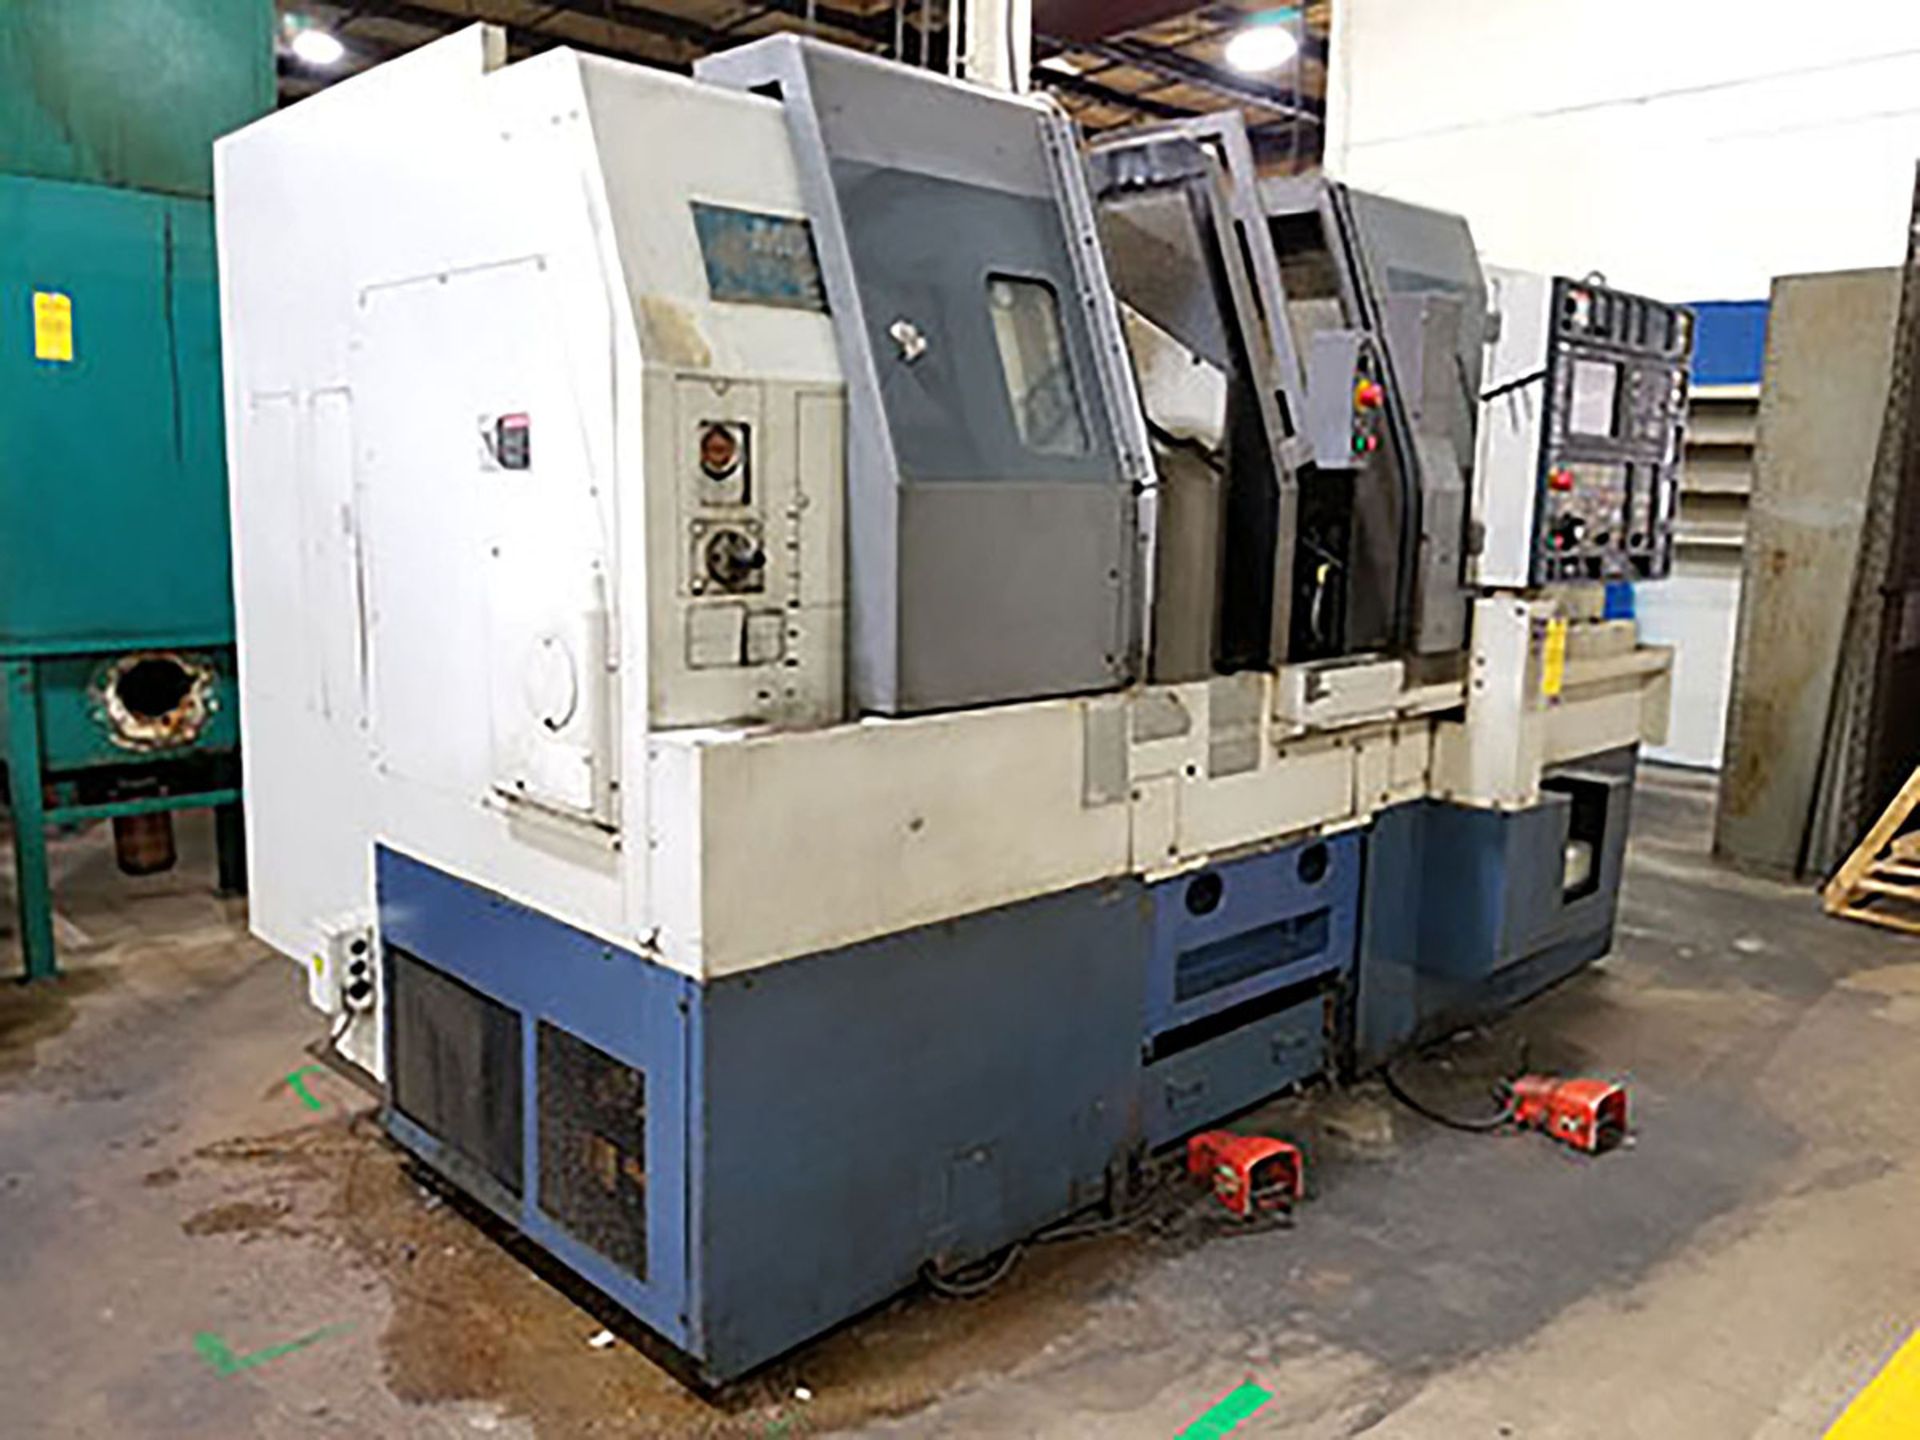 2000 MORI SEKI DL151 4-AXIS CNC TURNING CENTER; DUAL SPINDLE, (2) 12-POSITION TURRET, COOLANT, - Image 2 of 10